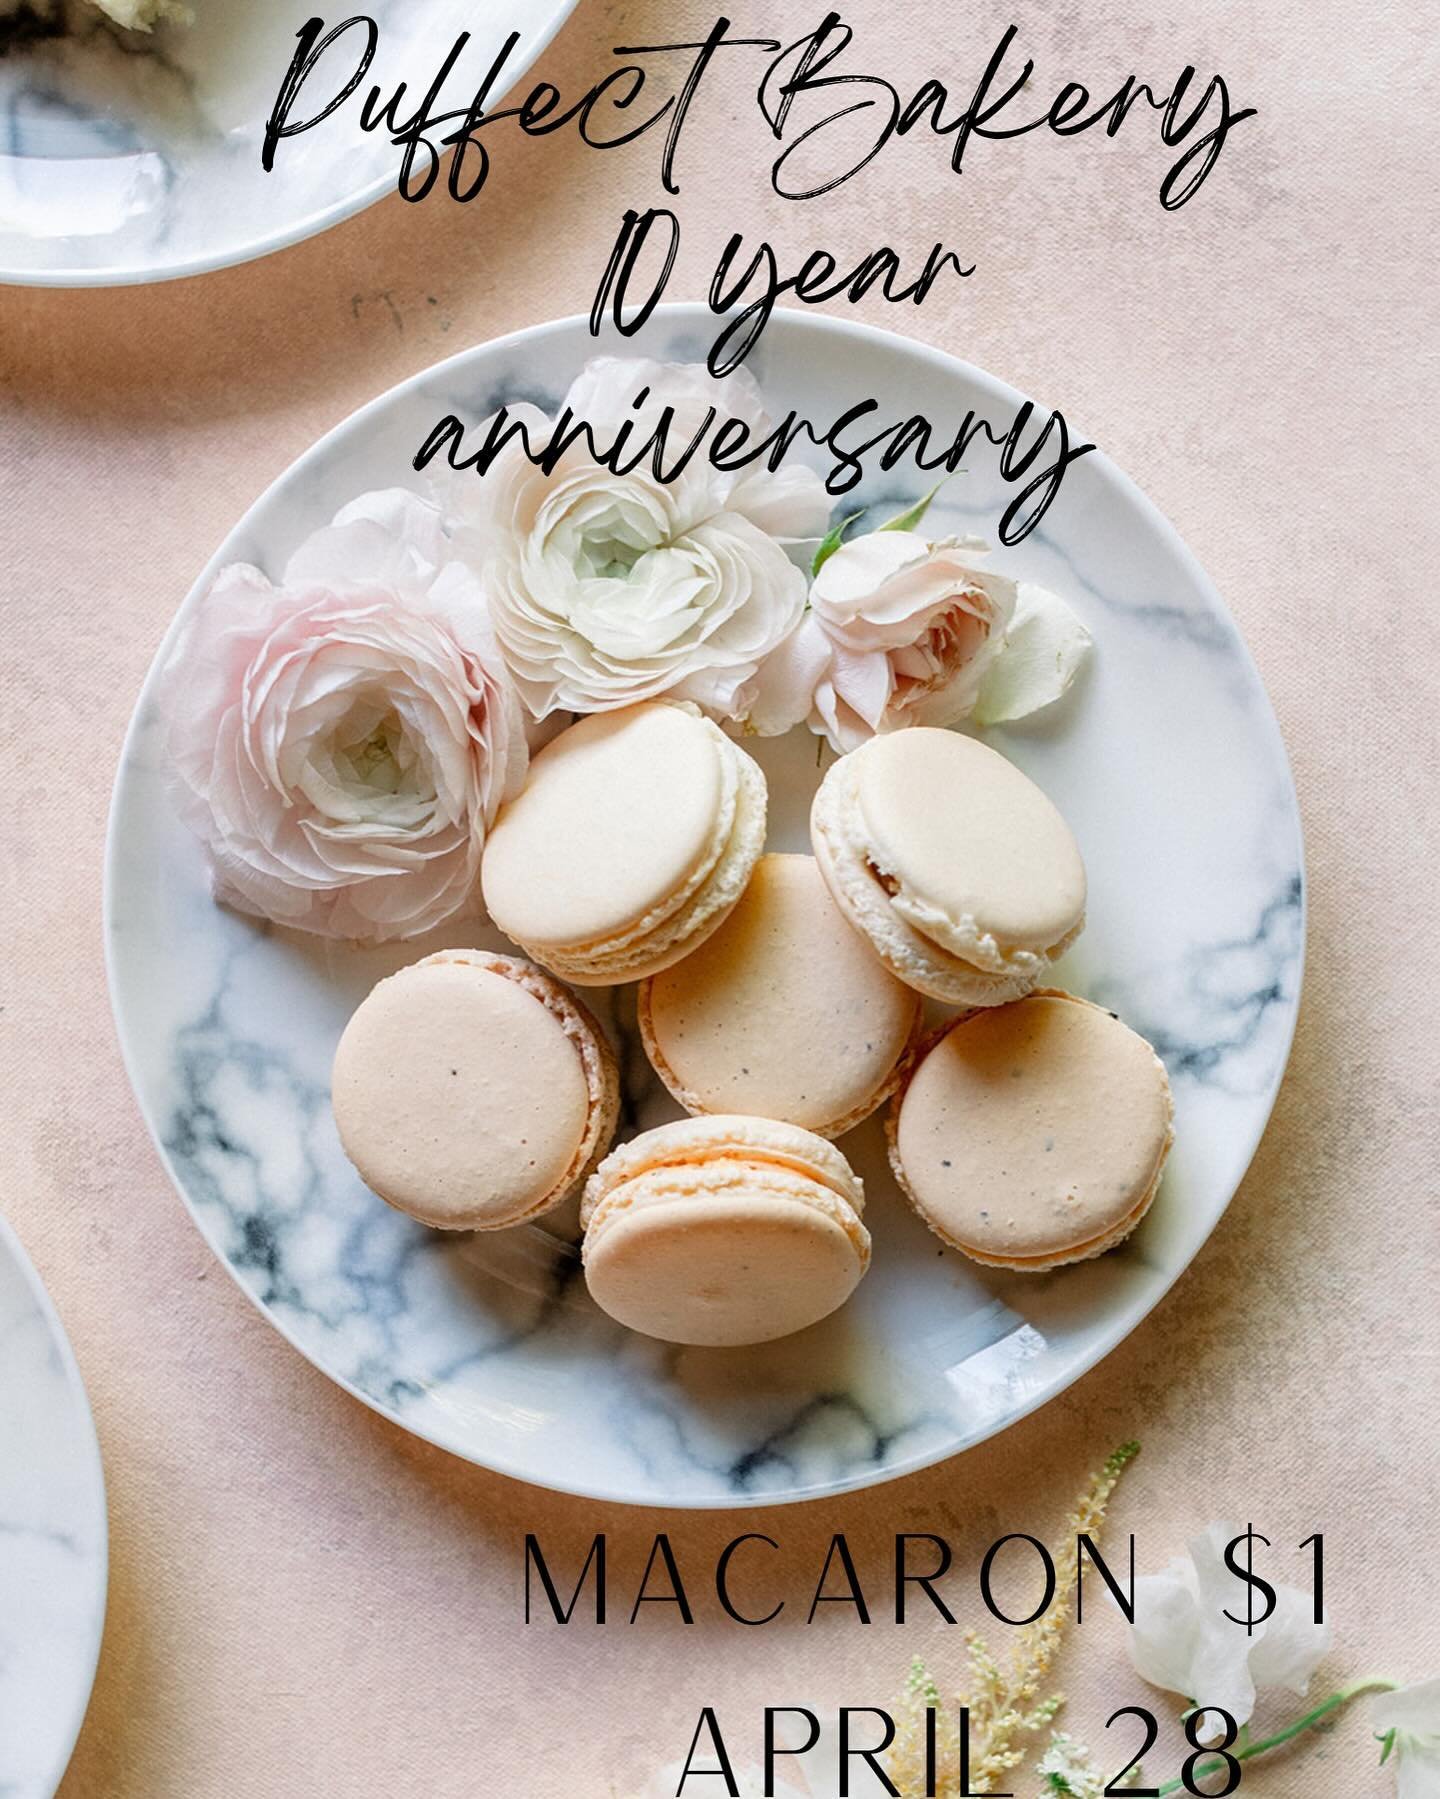 We definitely would not be able to reach our 10 year milestone without all of you! Thank you so much for having us a part of your celebrations and choosing us to be your choice for sweet treats!

We are celebrating by having our macarons for $1 on Su